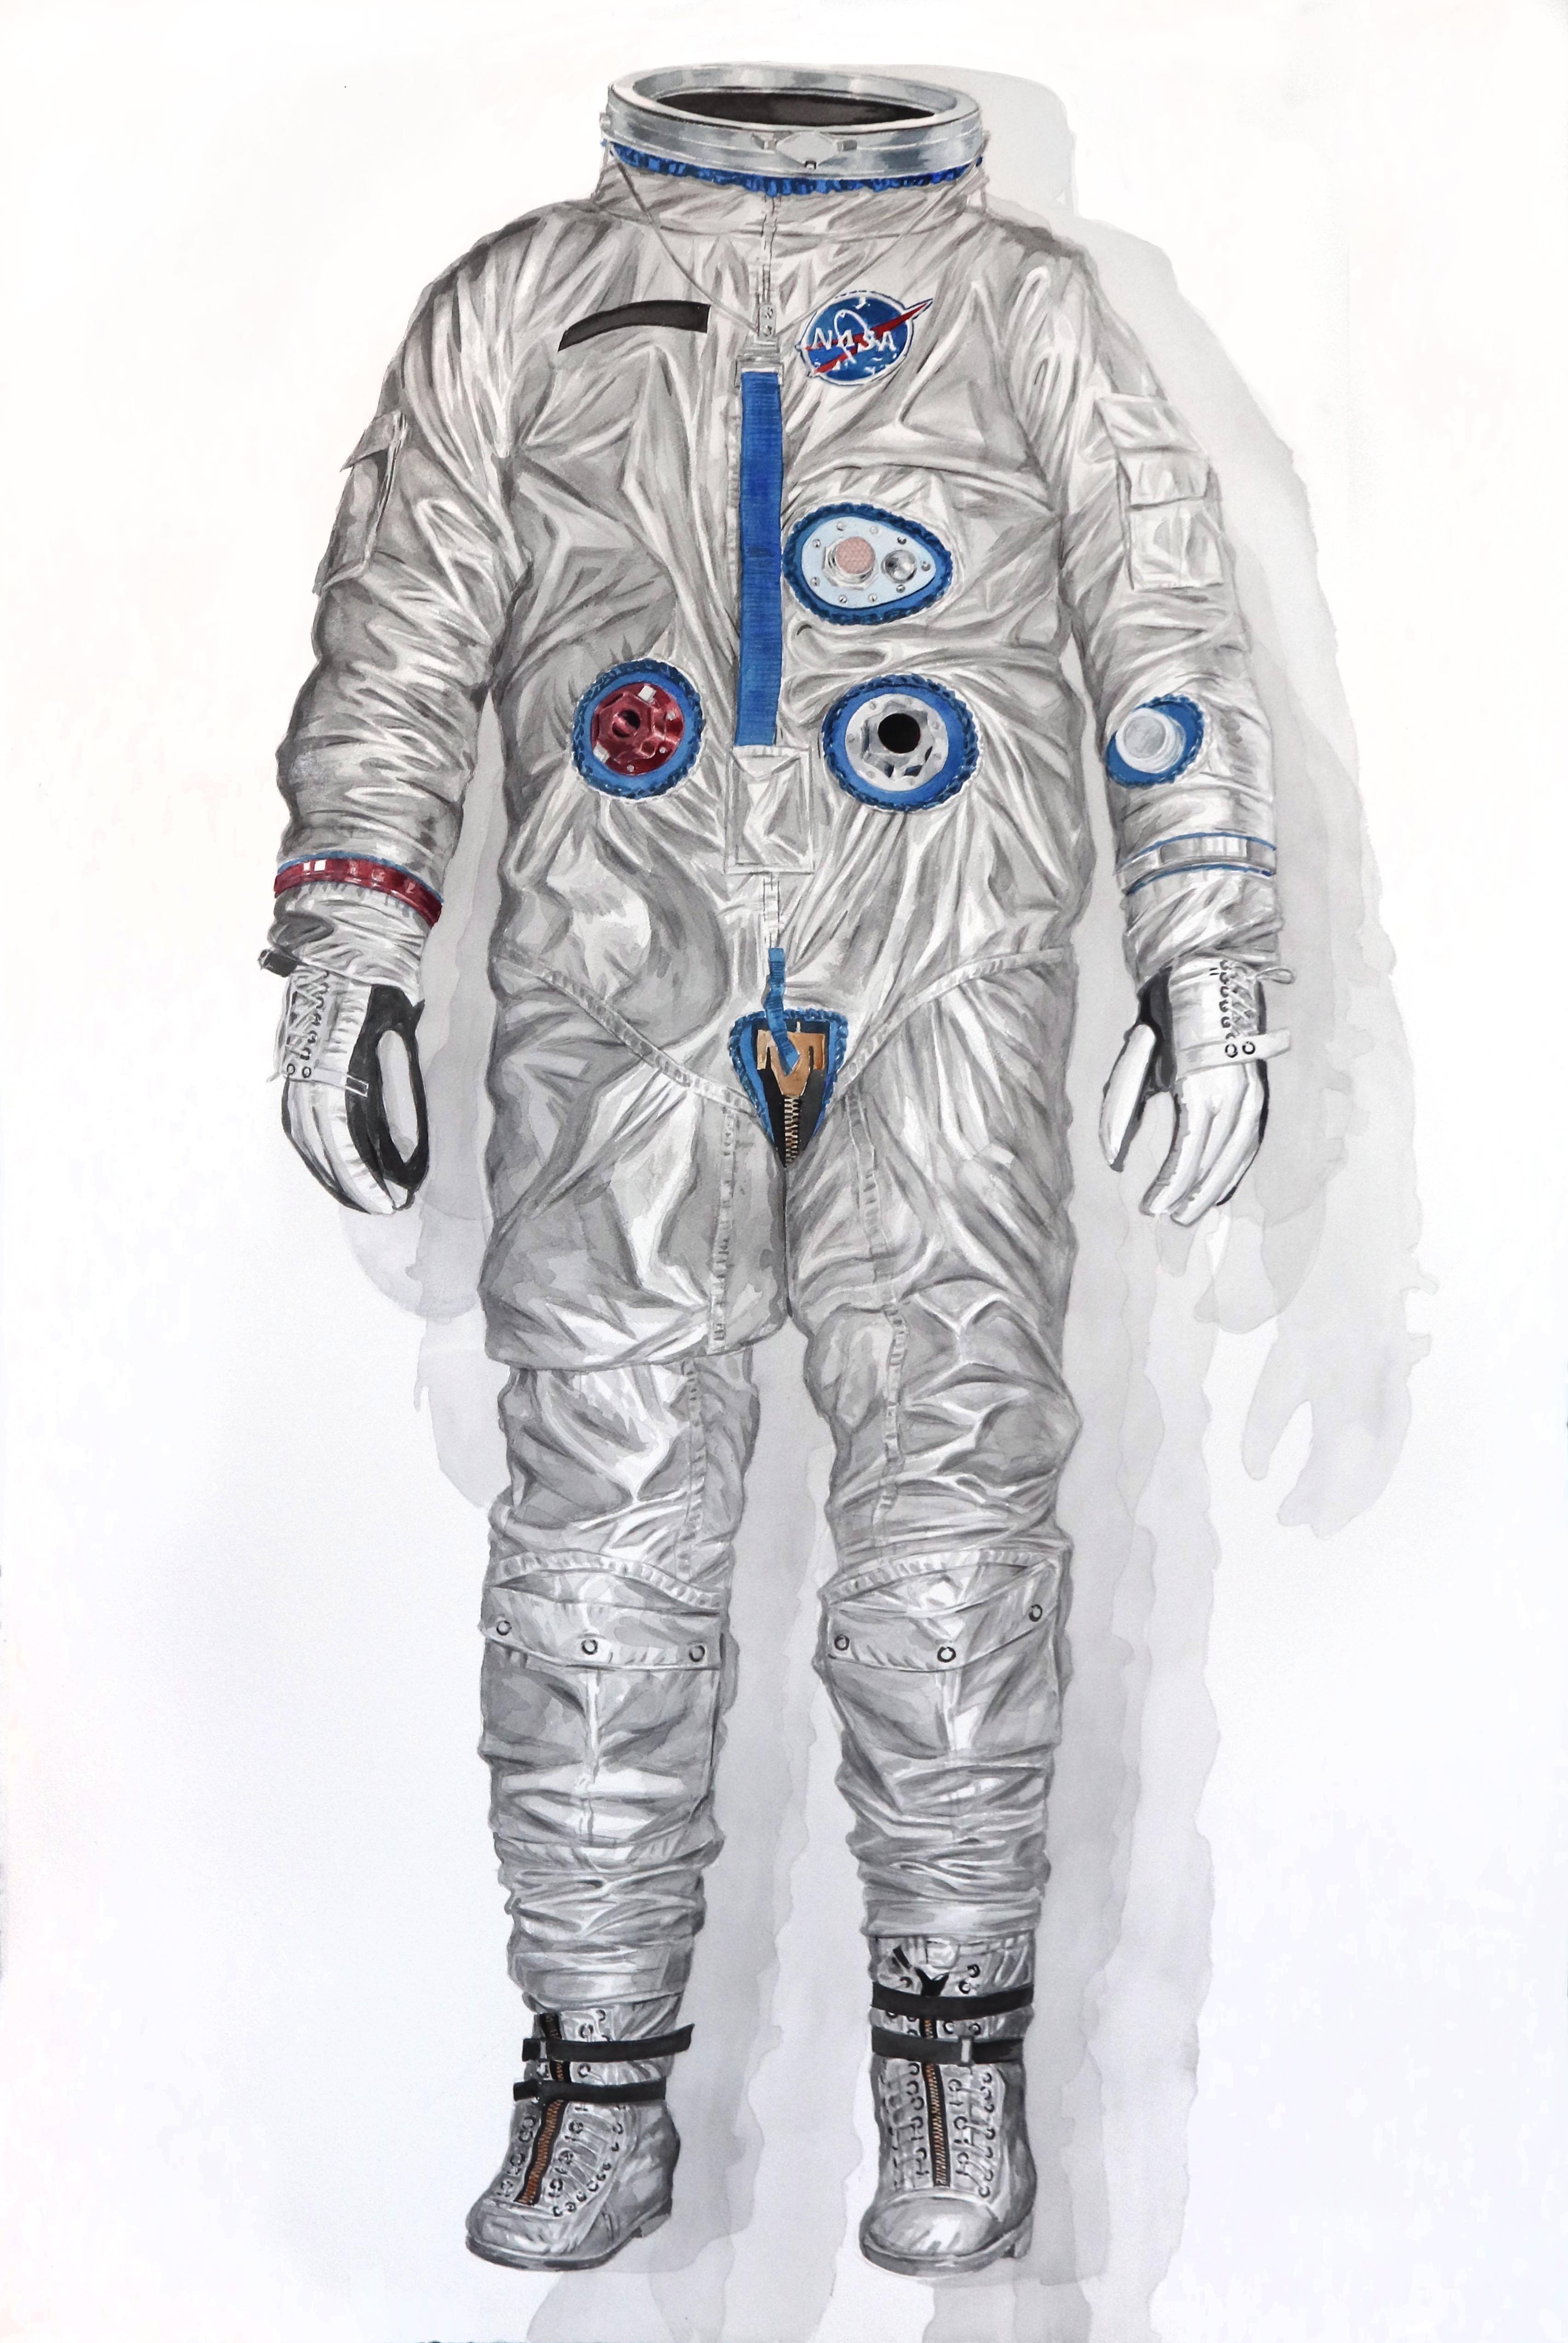 Thomas Broadbent Portrait Painting - "Silver Suit" (Early Gemini Spacesuit) large scale watercolor painting (framed)